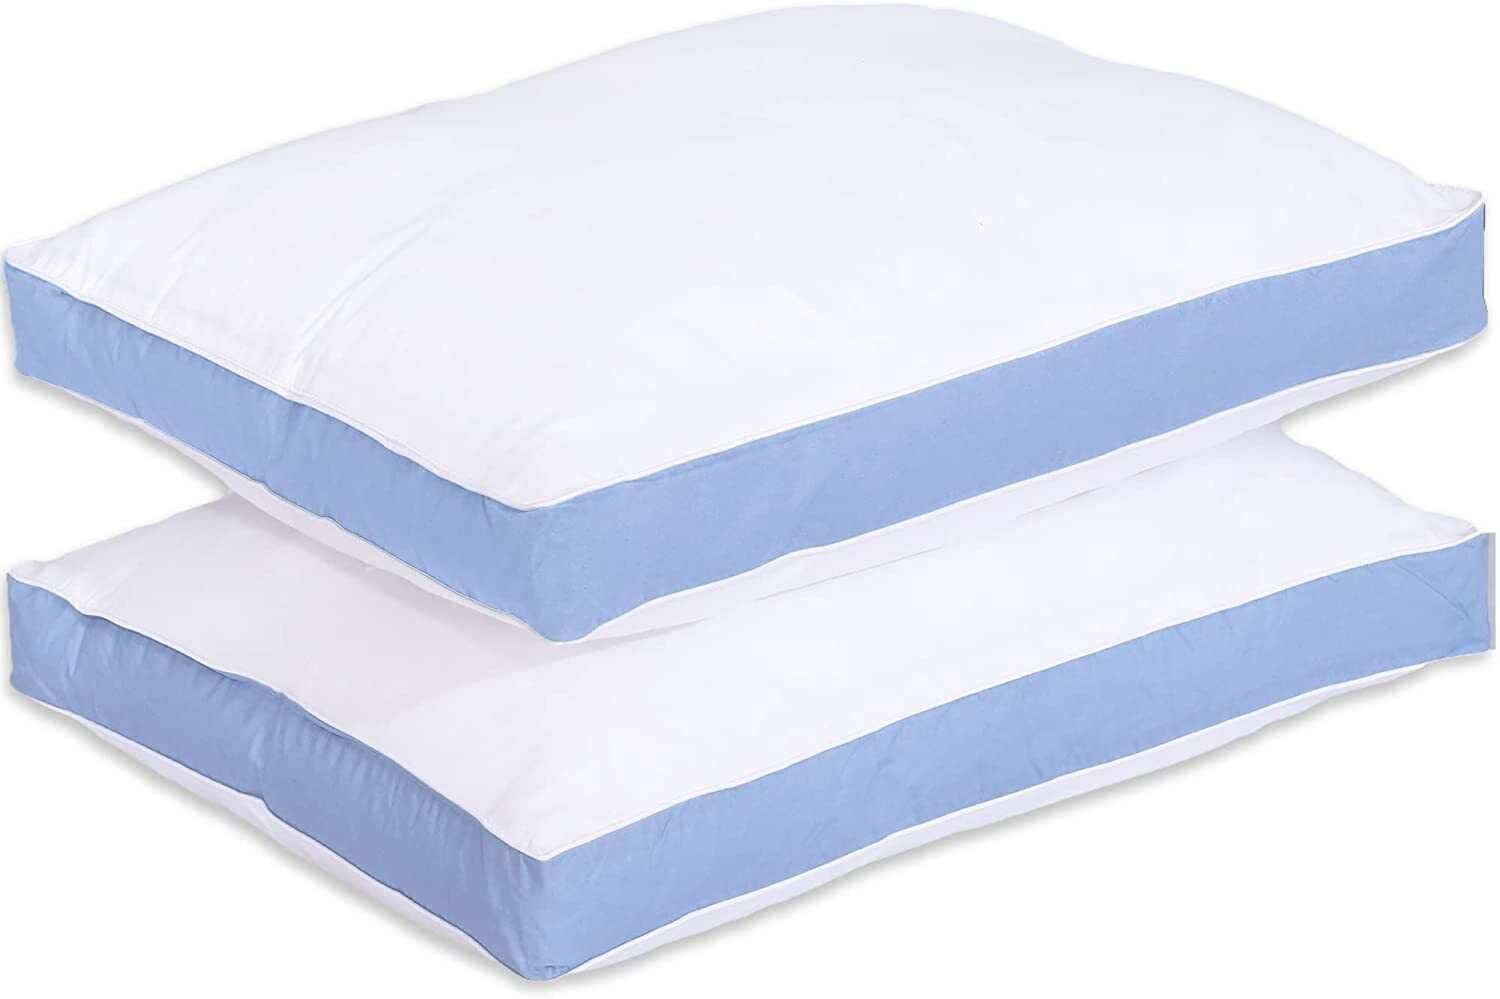 Gusseted Pillow Set of 2 Head Neck Support Side & Back Sleeper Queen Bed Pillows